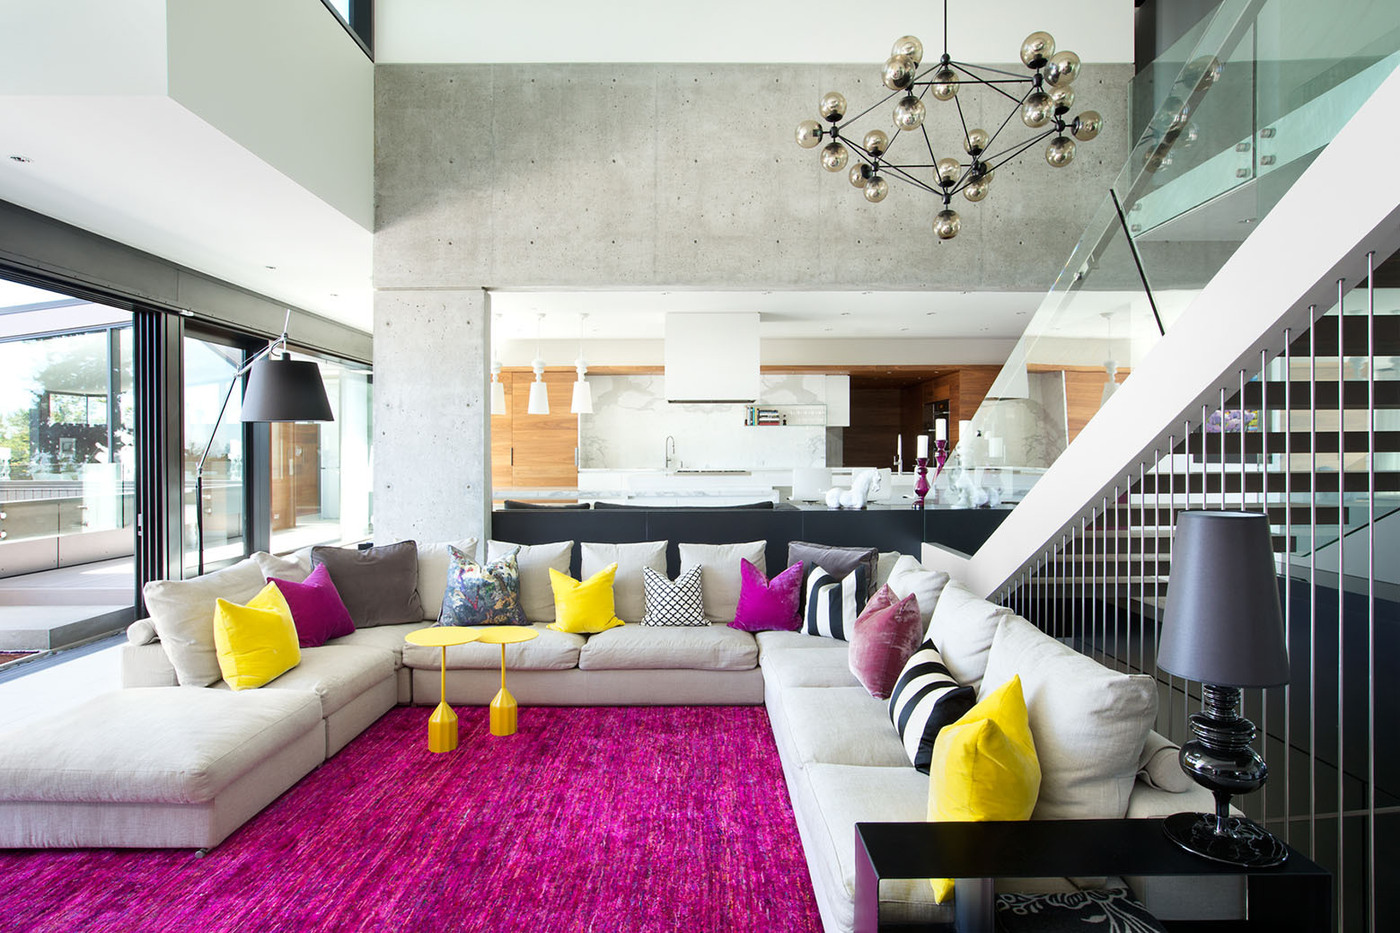 If You Love Colors You'll Love This Bright Living Room